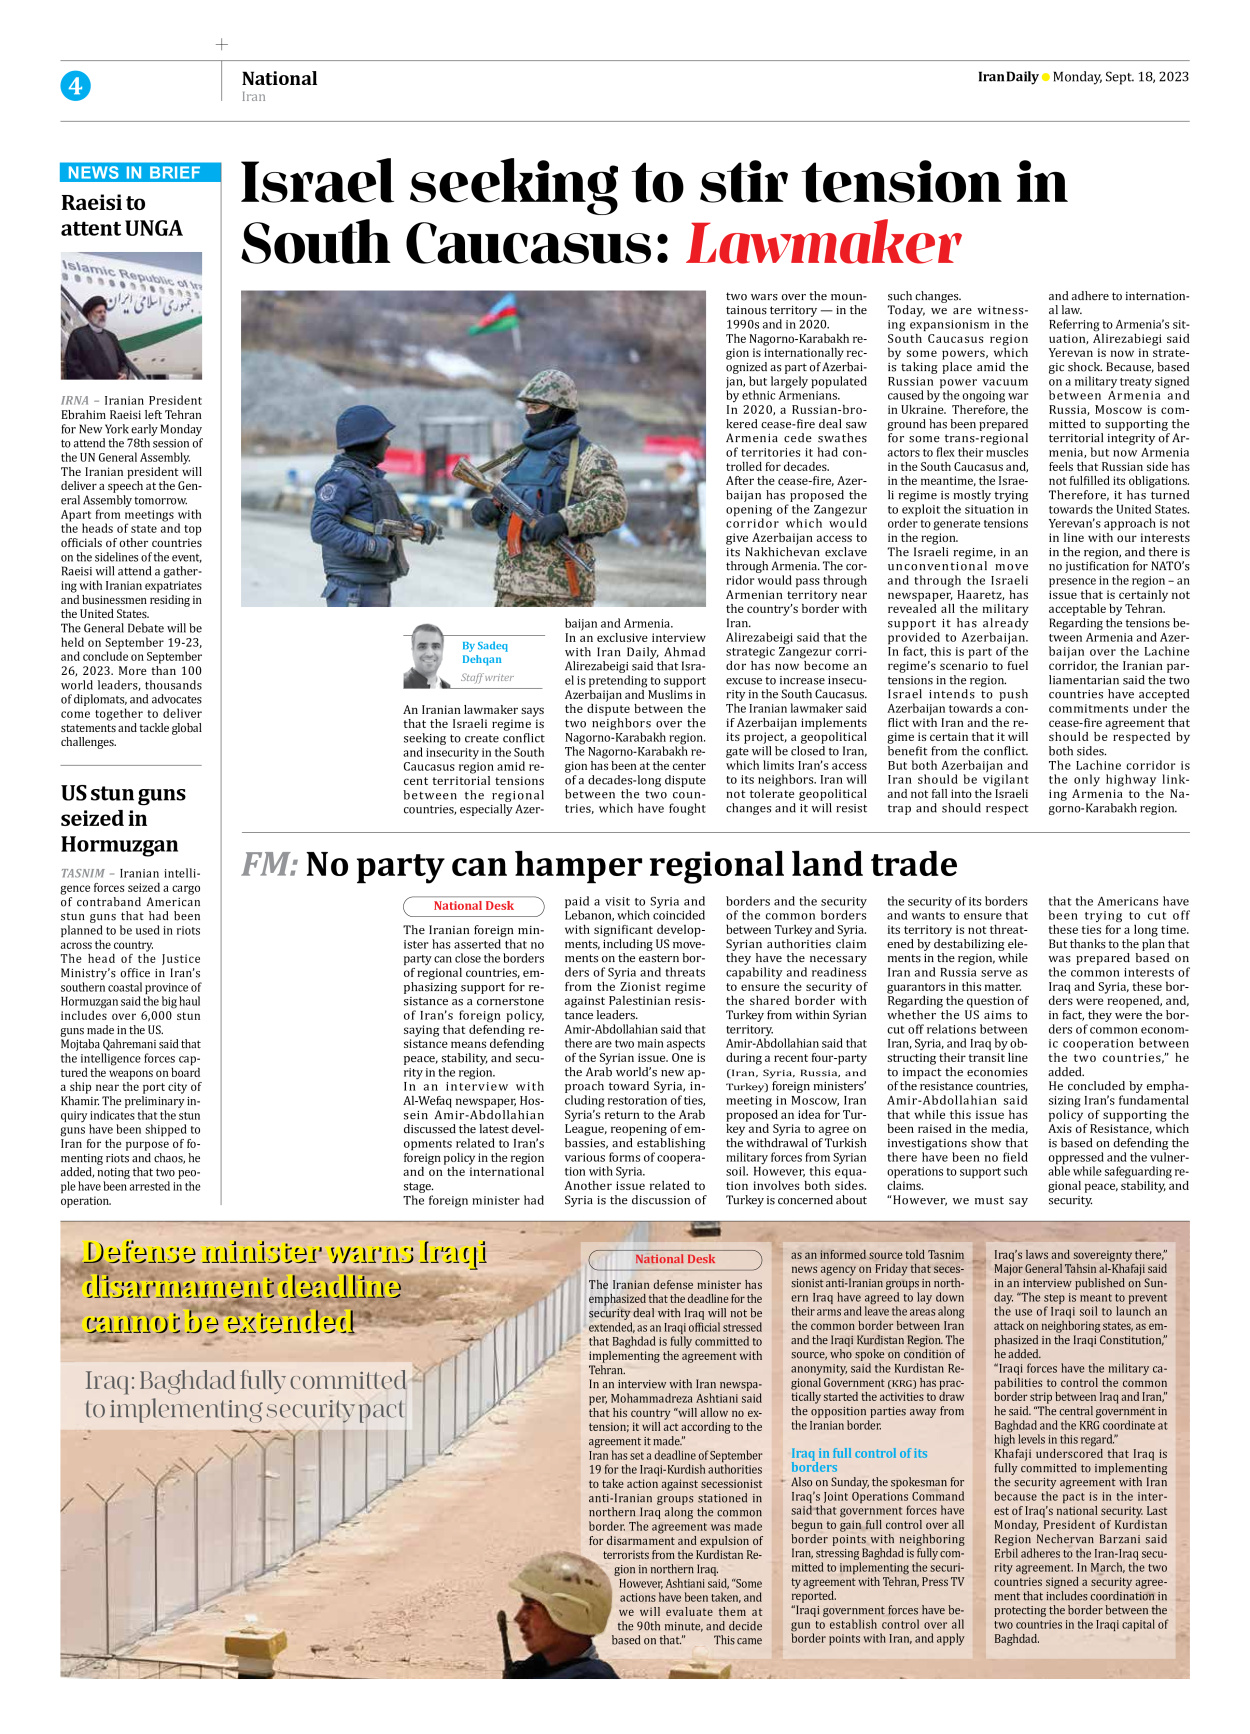 Iran Daily - Number Seven Thousand Three Hundred and Eighty Eight - 18 September 2023 - Page 4